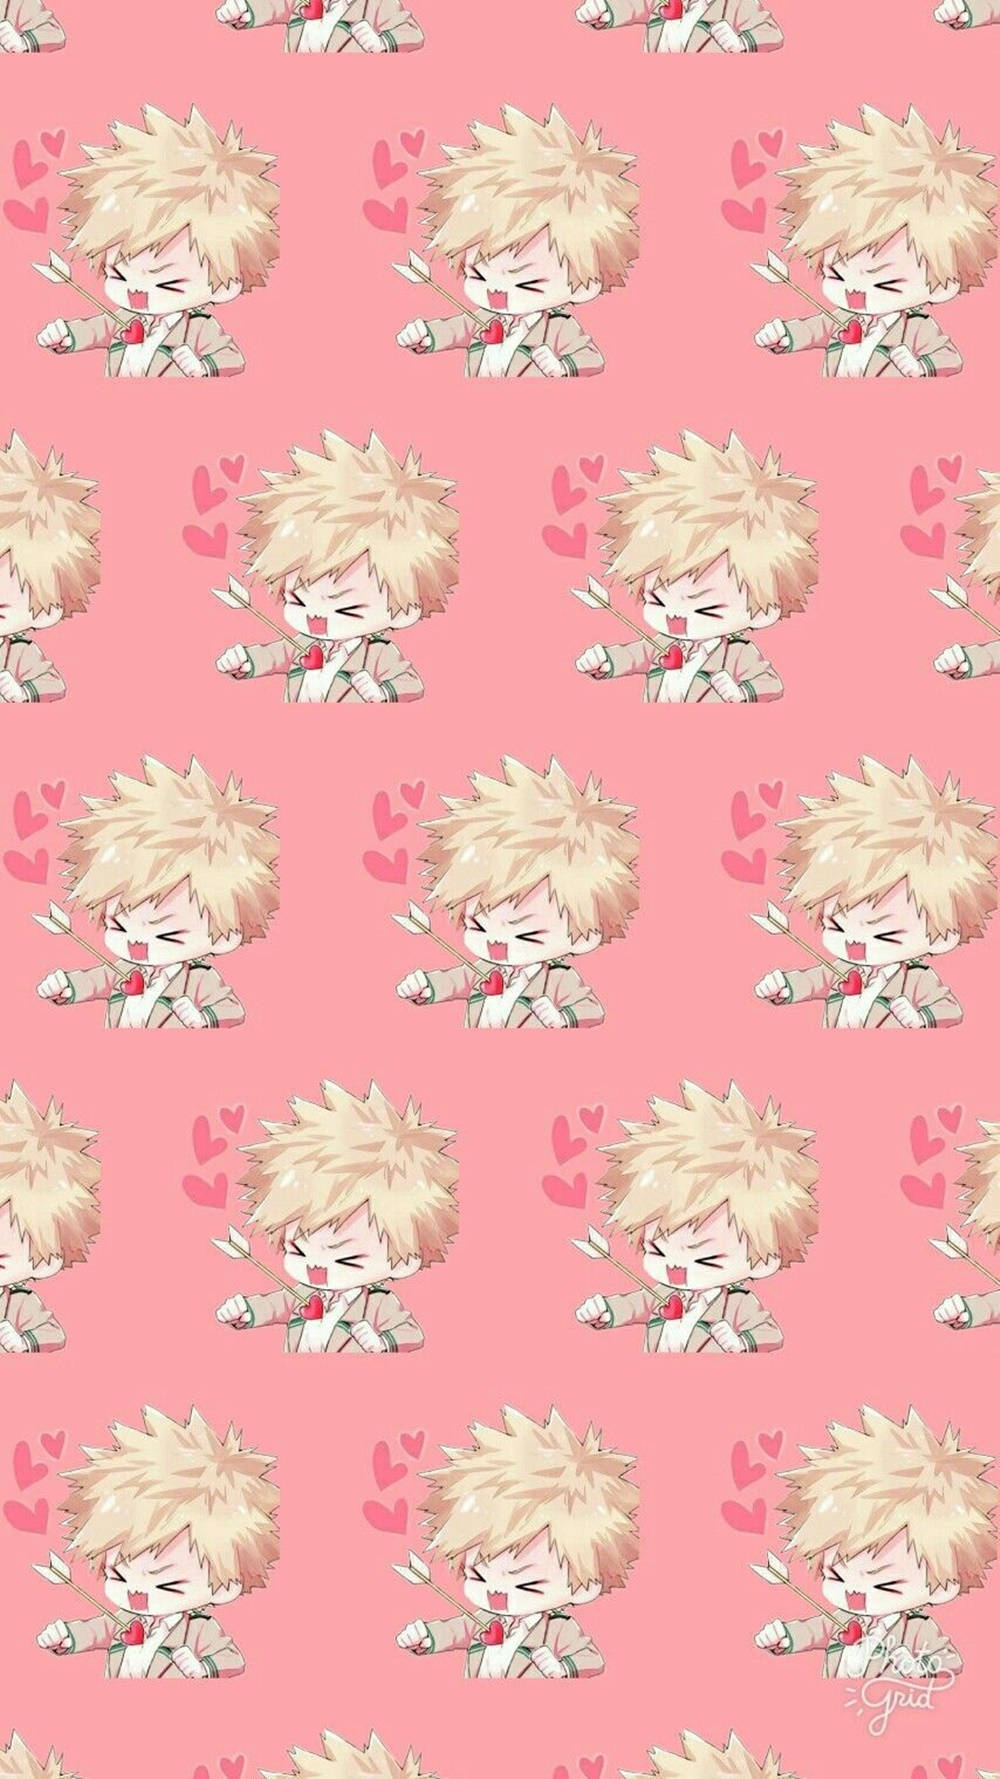 Cute Bakugou Shows Off His Unique Fiery Personality In This Fun Portrait Background